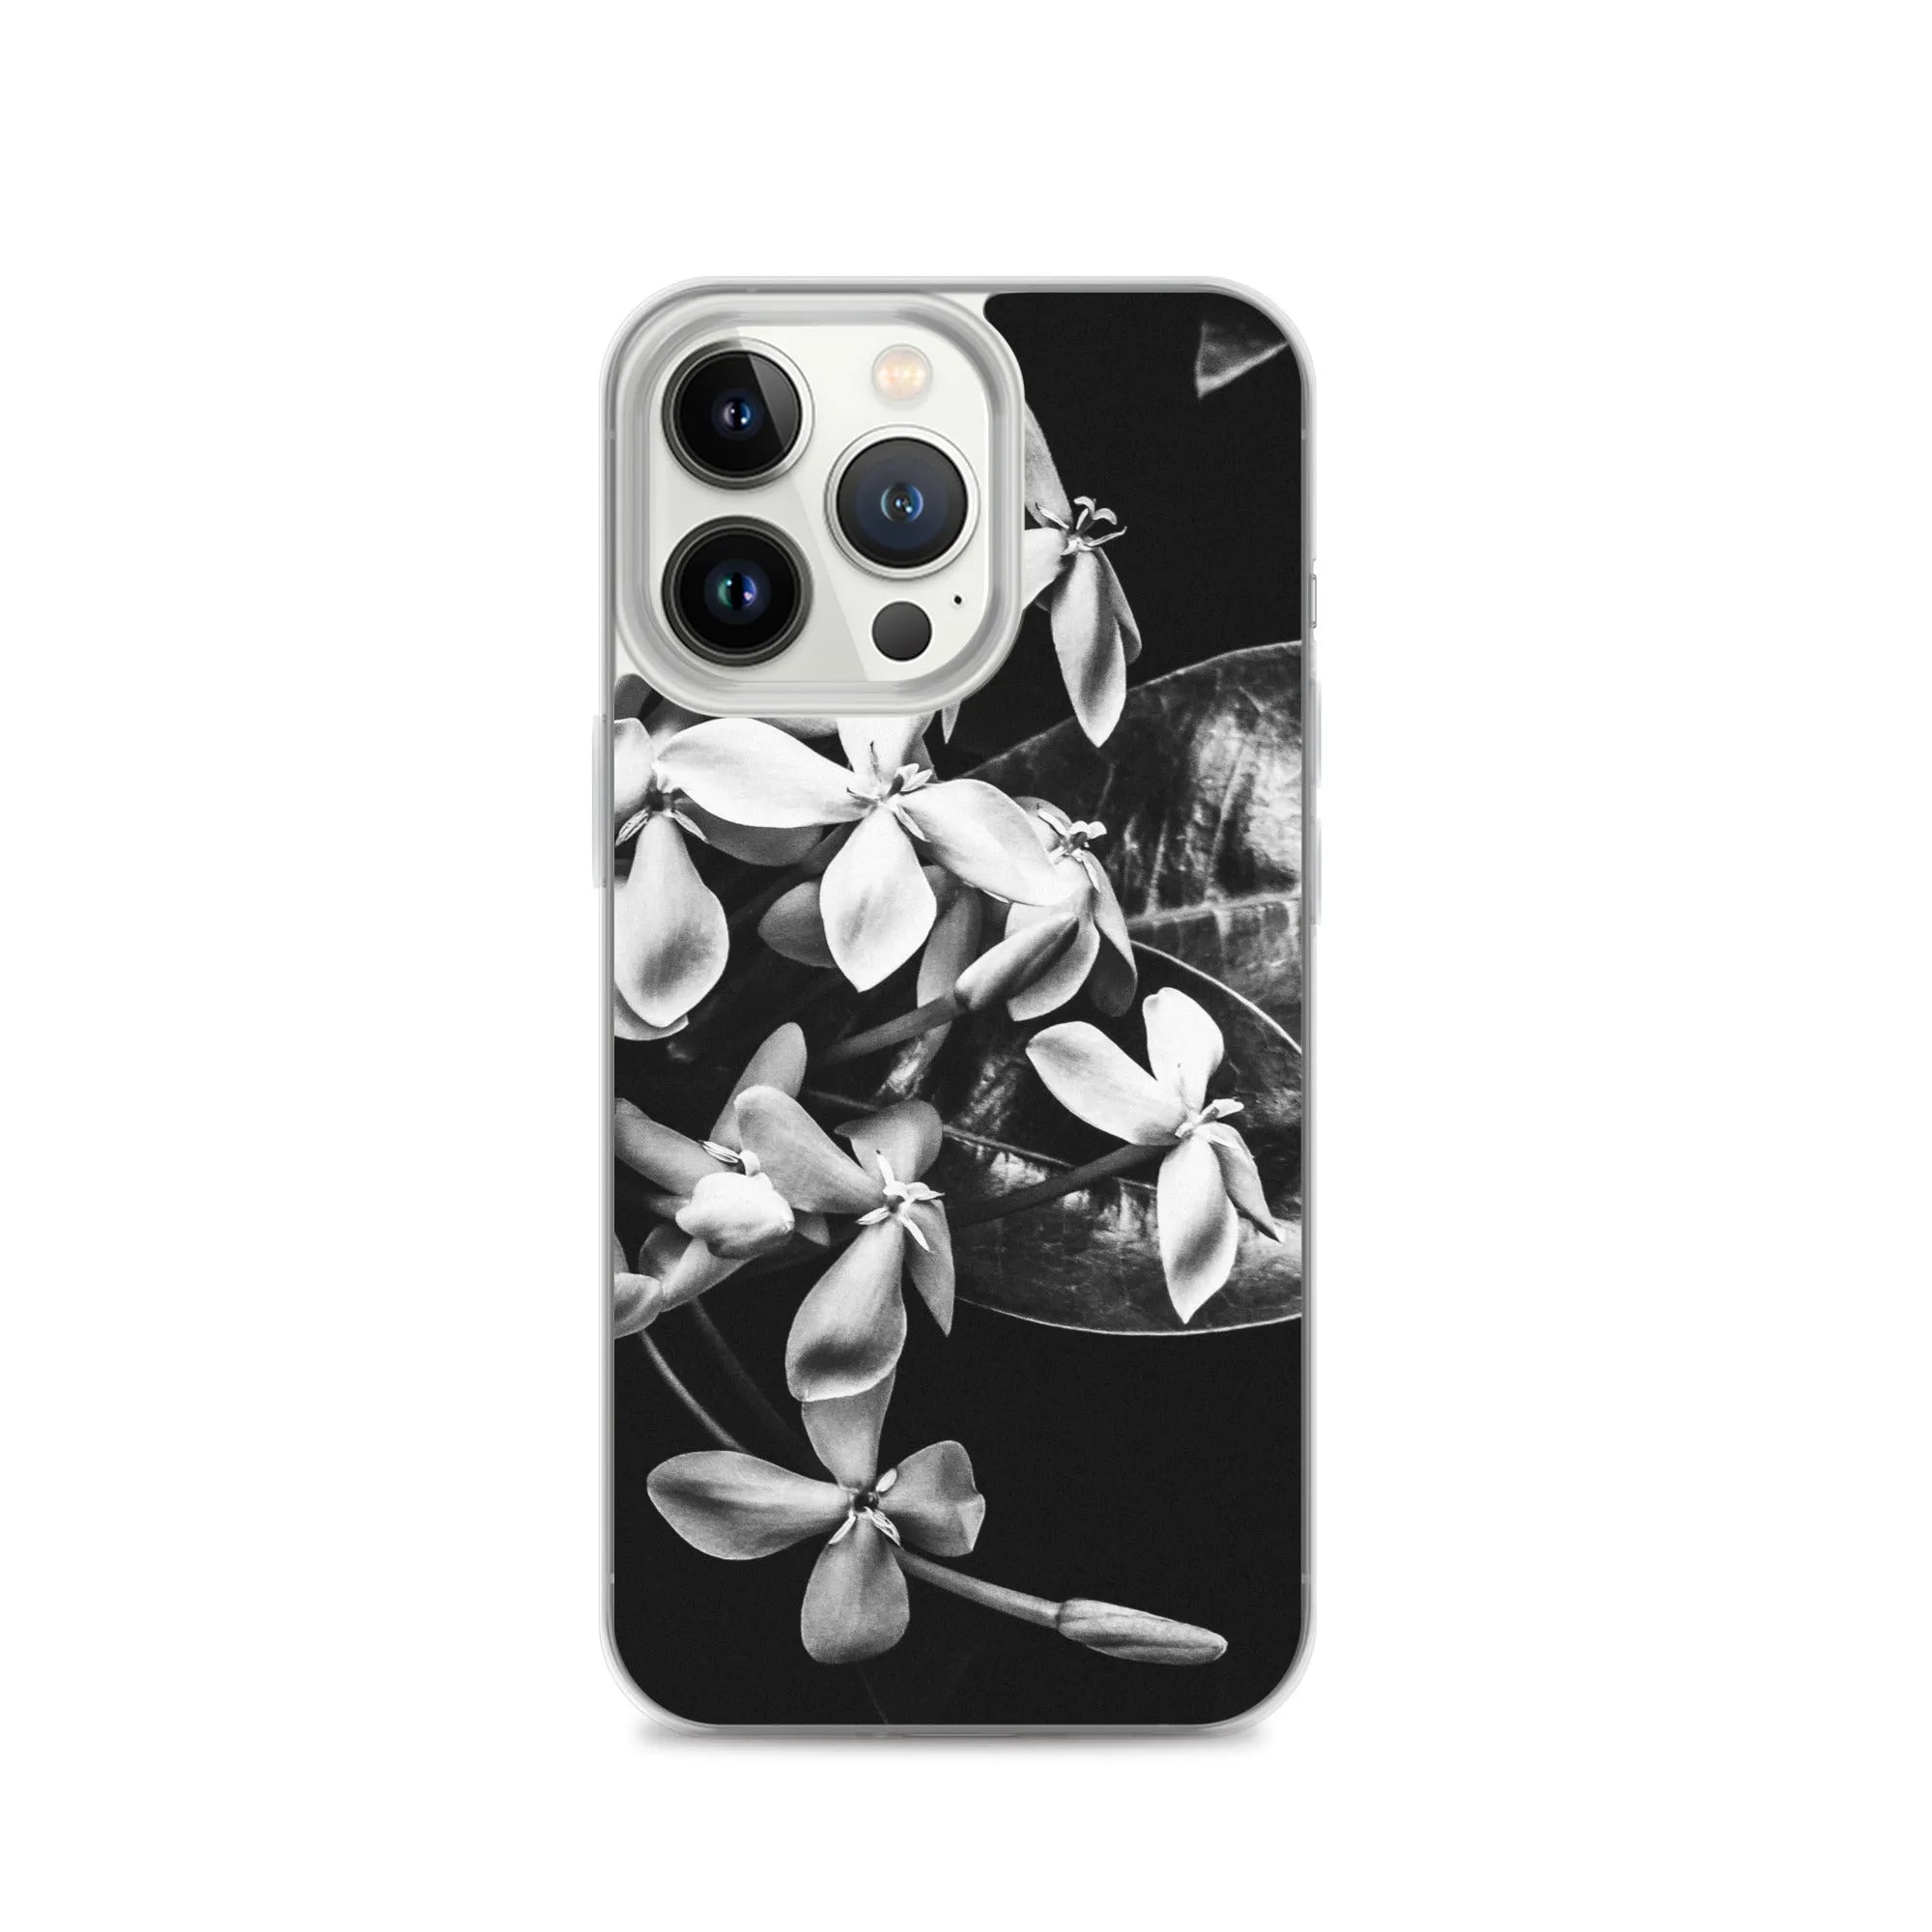 Belle Of The Ball Floral Iphone Case - black And White - Mobile Phone Cases - Aesthetic Art